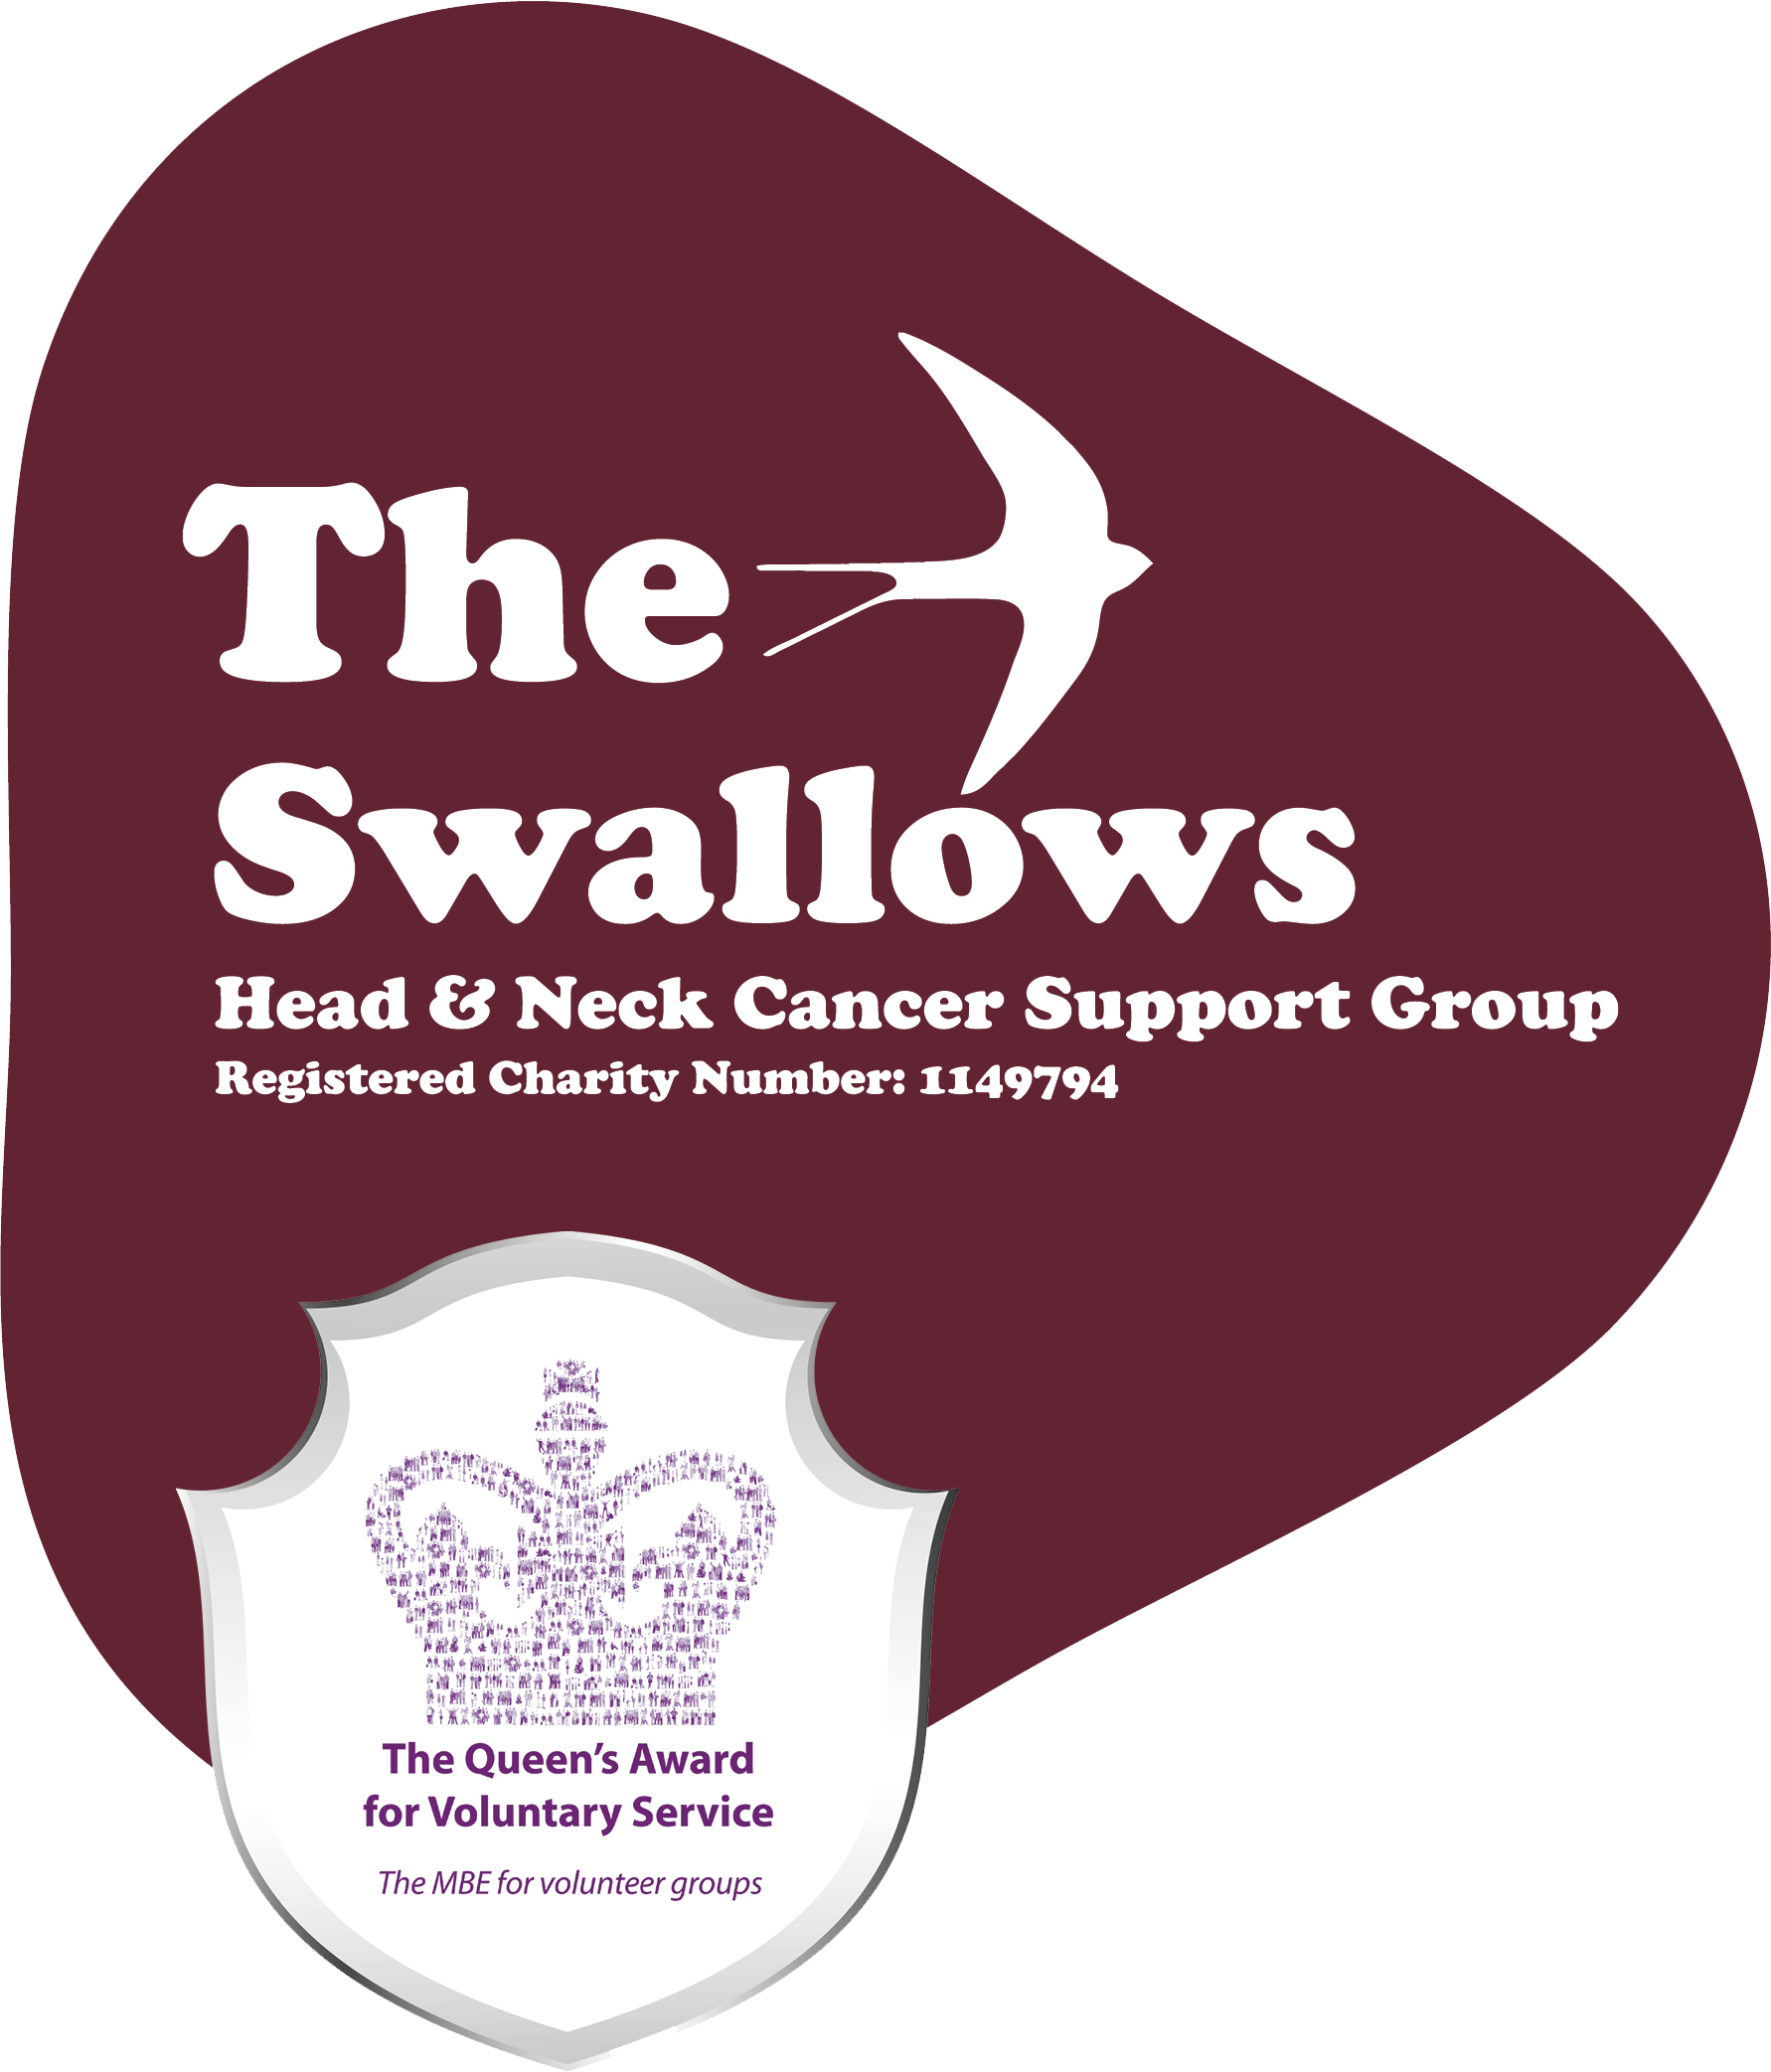 The Swallows Head & Neck Cancer Charity